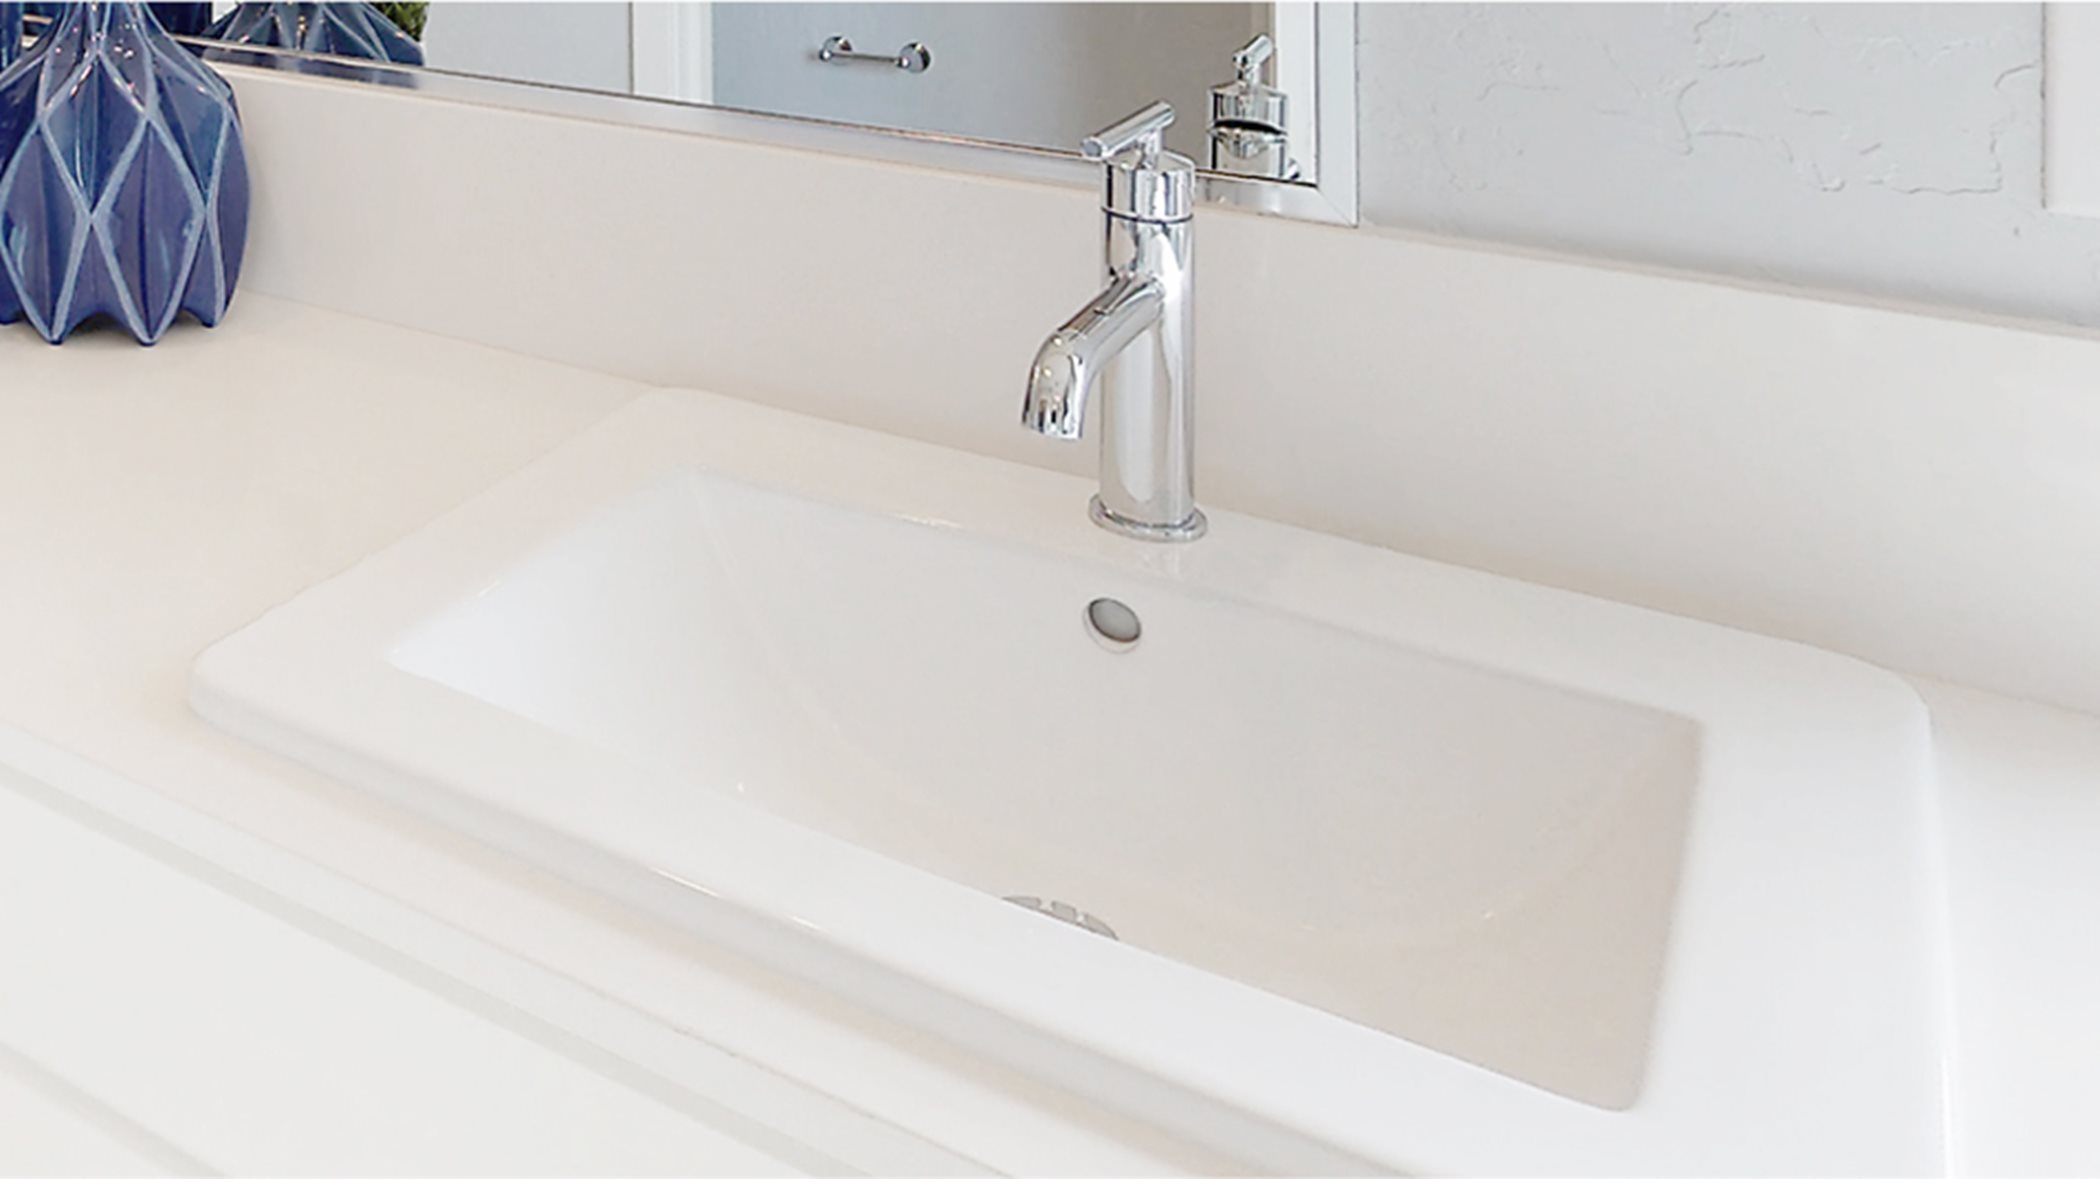 Gossamer Grove Clementine Series Dewberry Faucets